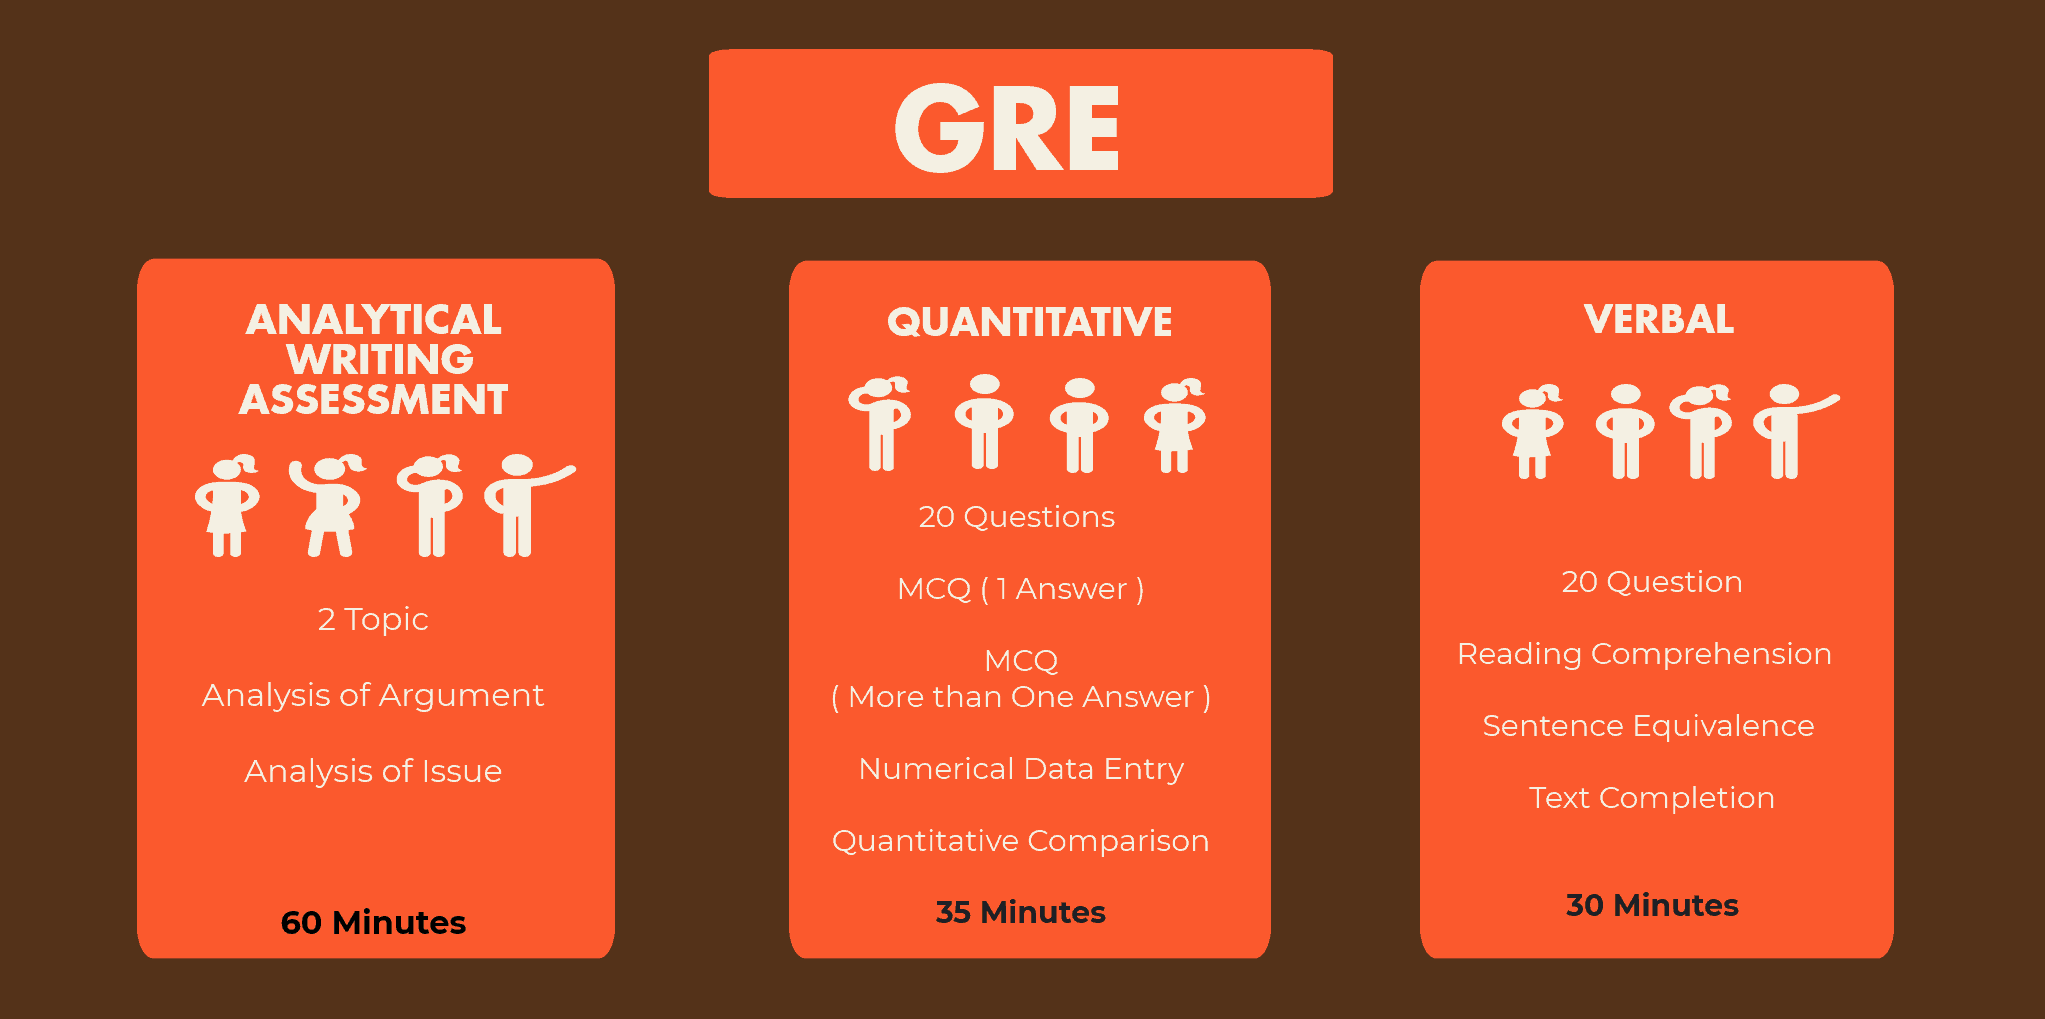 8 Tips to score better in GRE DI!